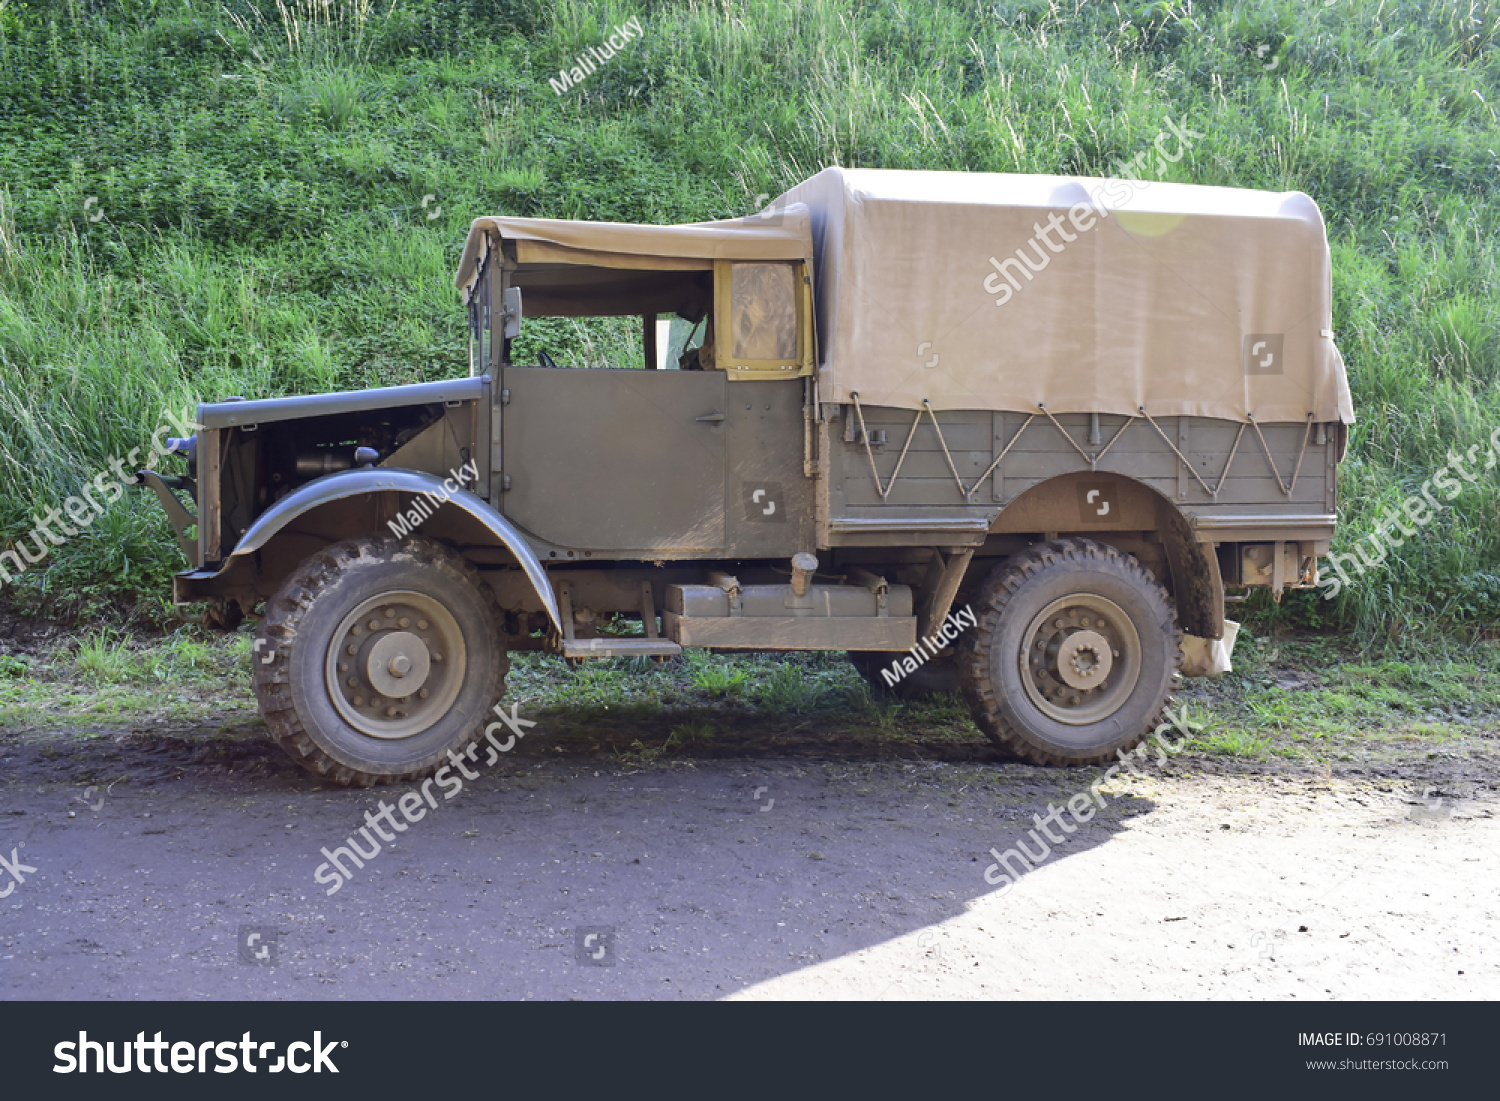 Old military car, old army transport car. #691008871